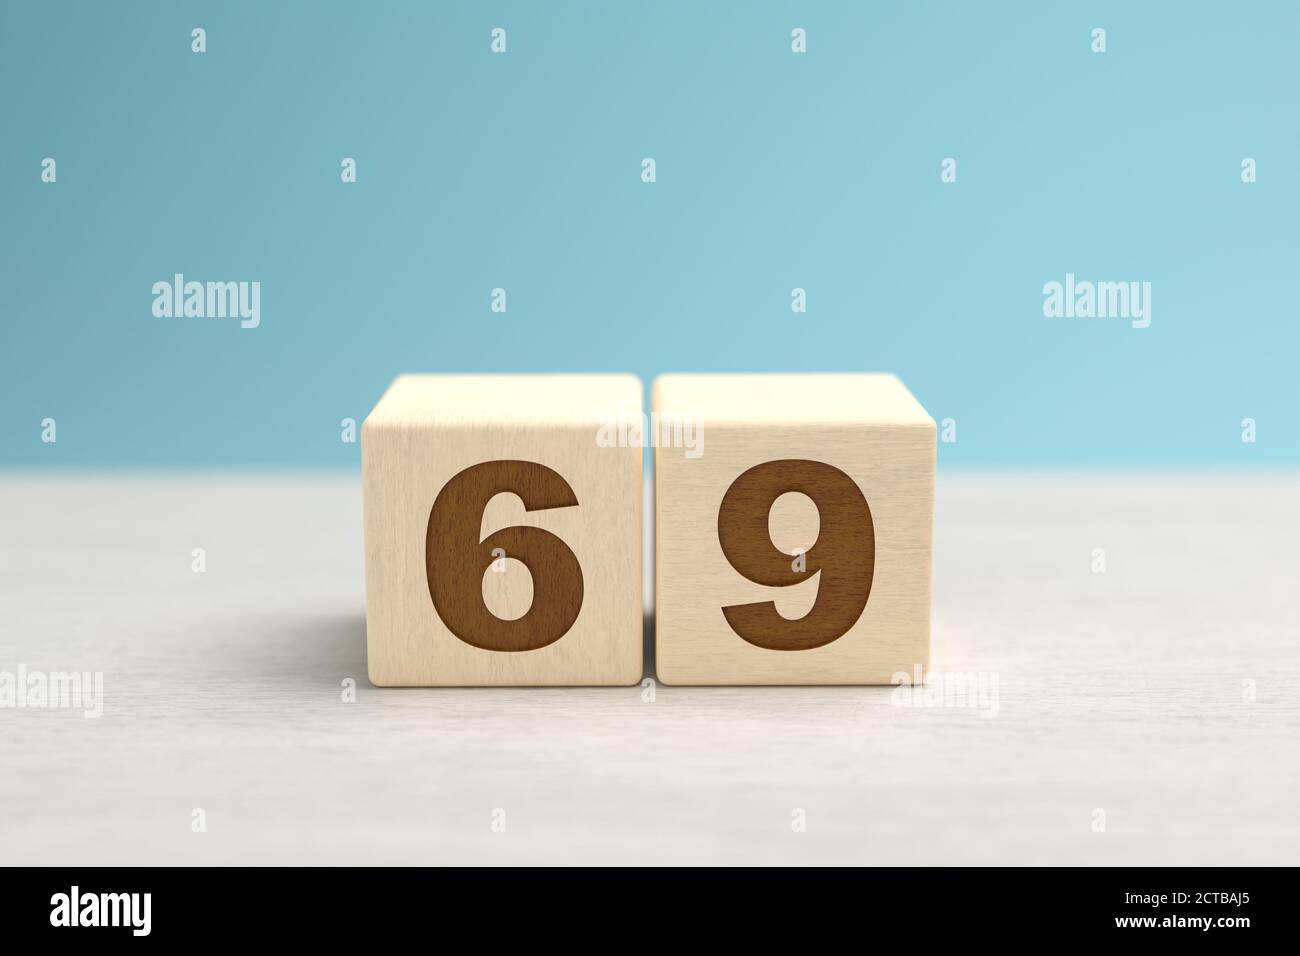 Wooden toy blocks forming the number 69. Stock Photo